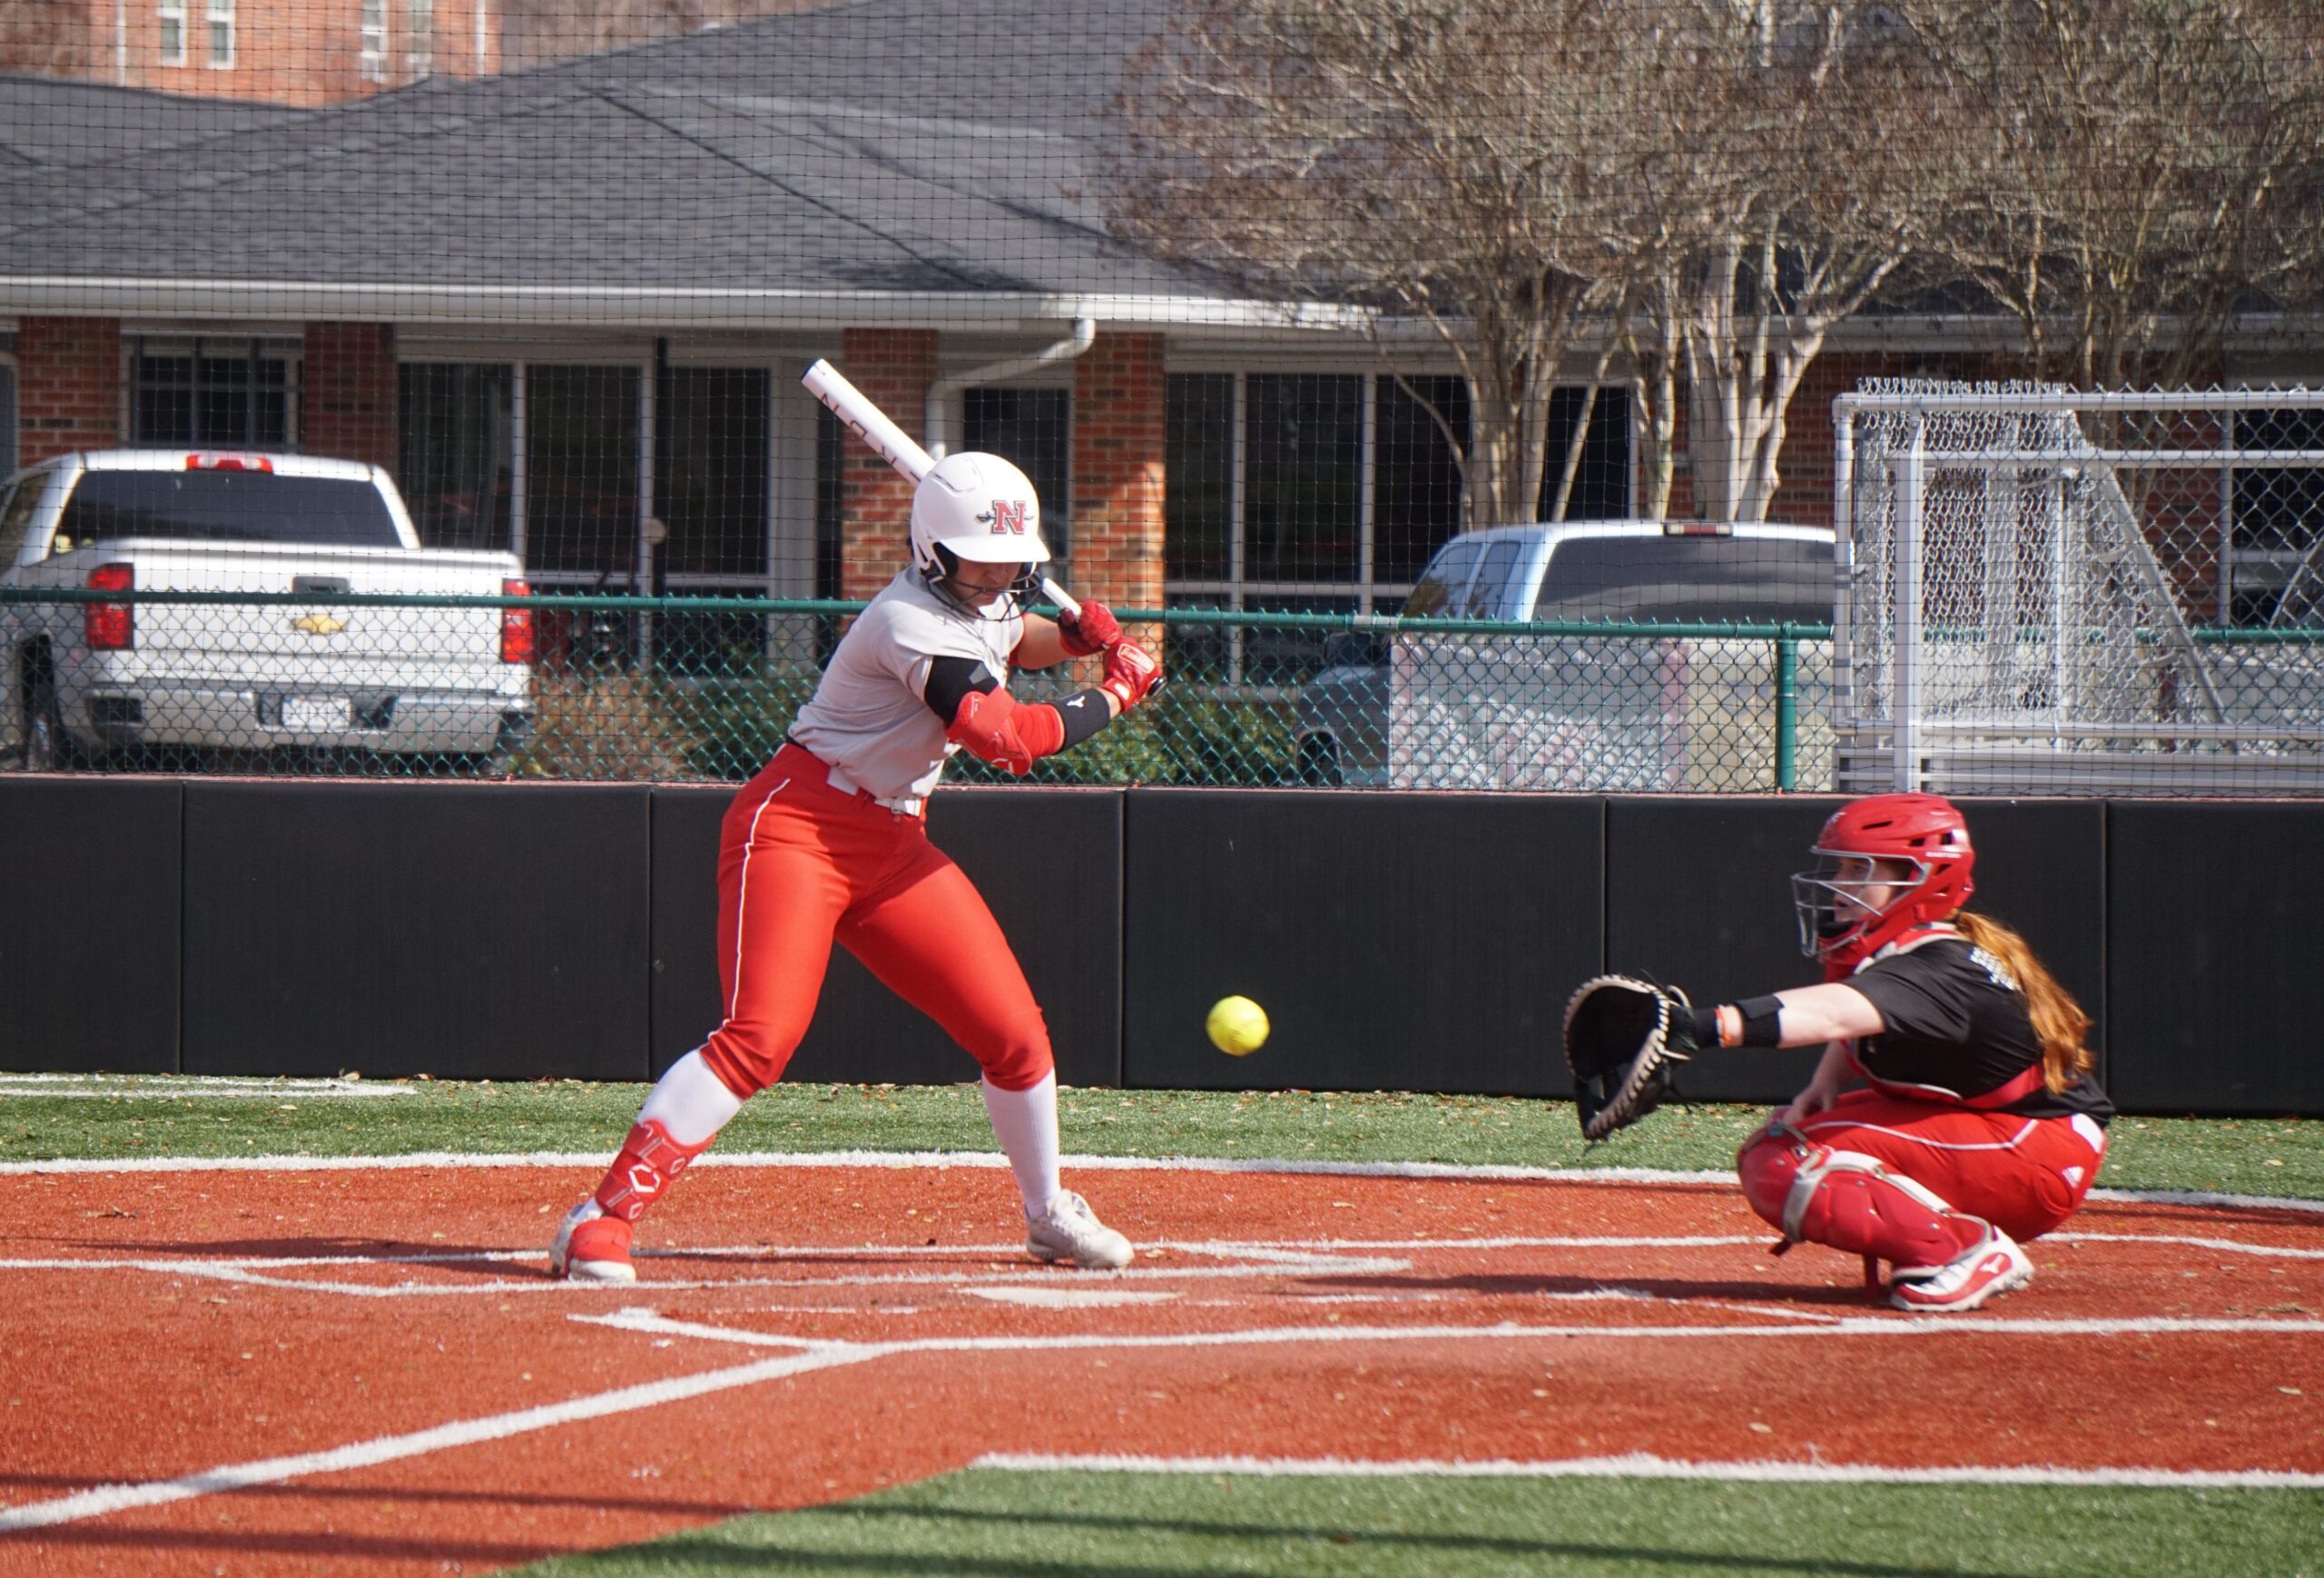 Thumbnail for Poche provides punch to enable Nicholls to beat UIW 4-2 in extra innings to avoid sweep